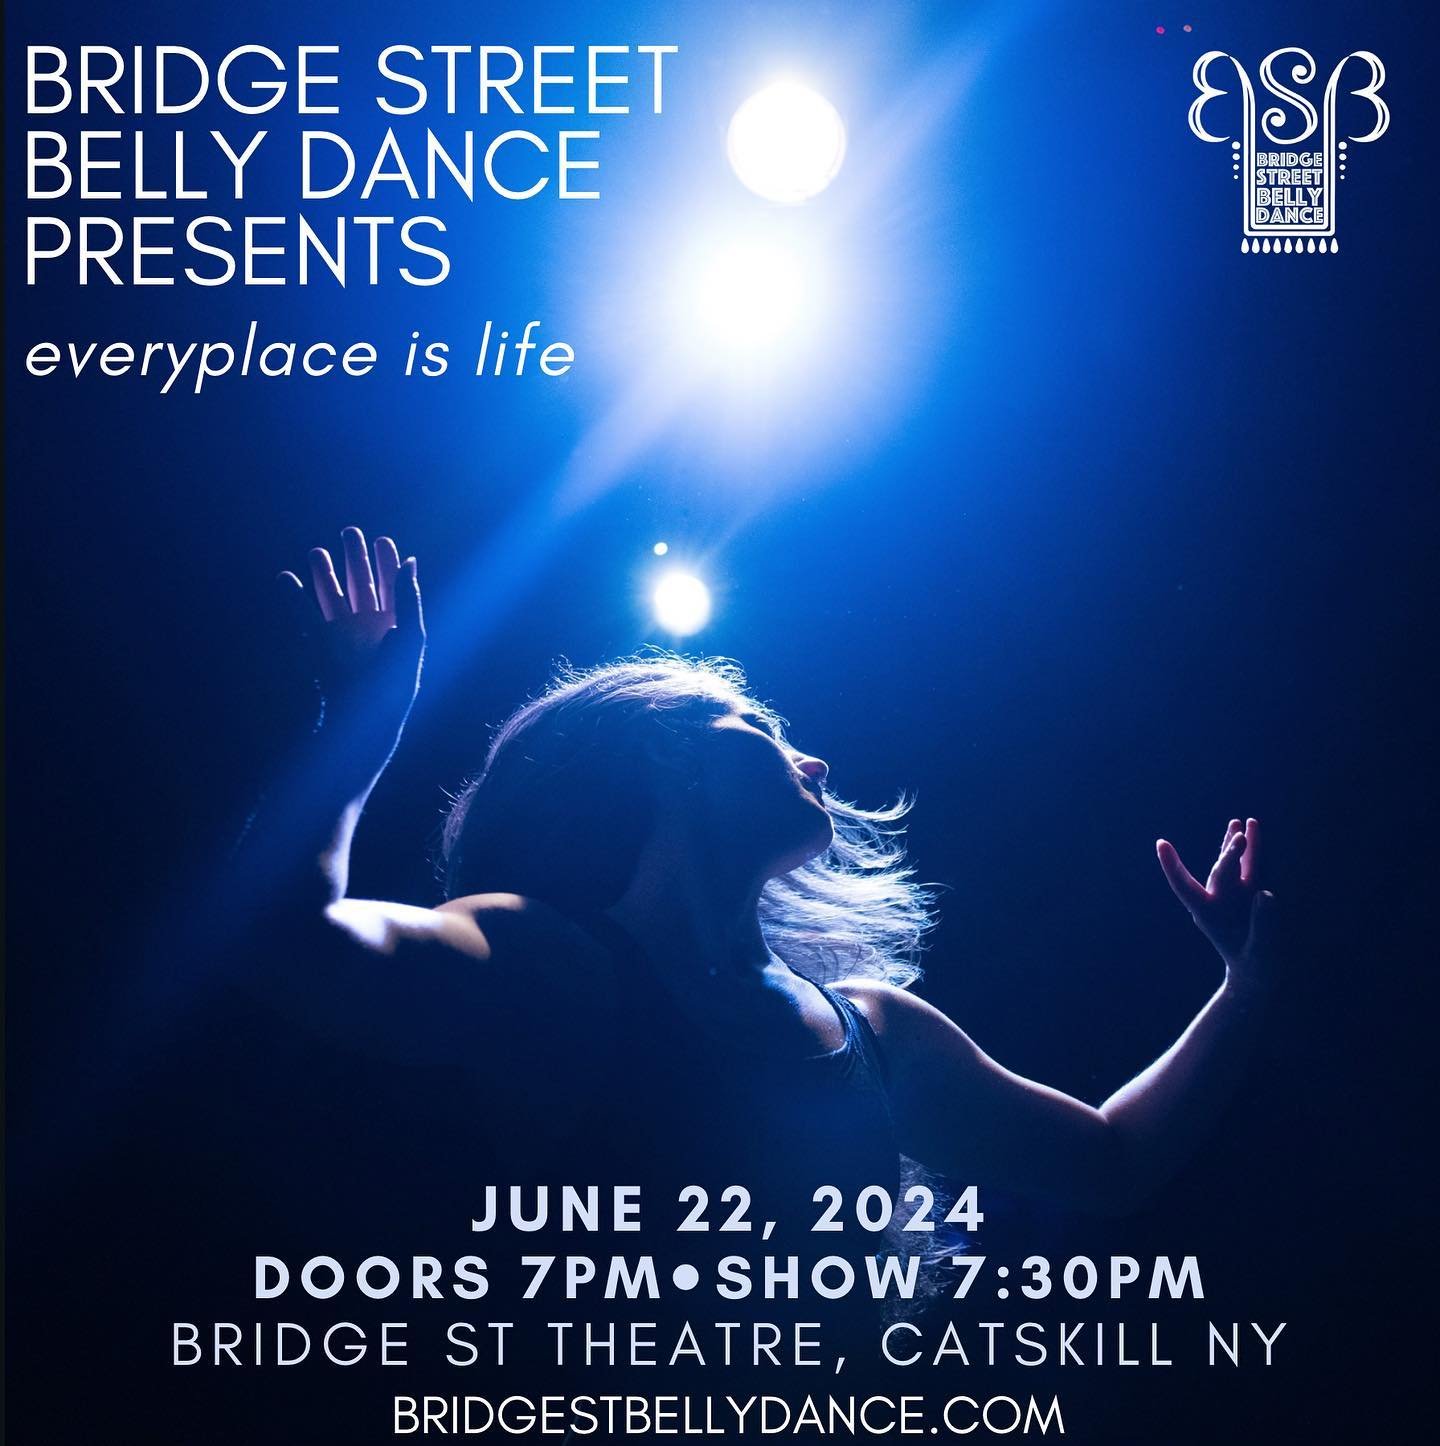 We&rsquo;re bringing the &ldquo;street&rdquo; to Bridge Street Belly Dance in 2024, as we celebrate our seventh show of innovation, growth, and storytelling through movement and dance.

Bridge Street is excited to collaborate once again in 2024 with 